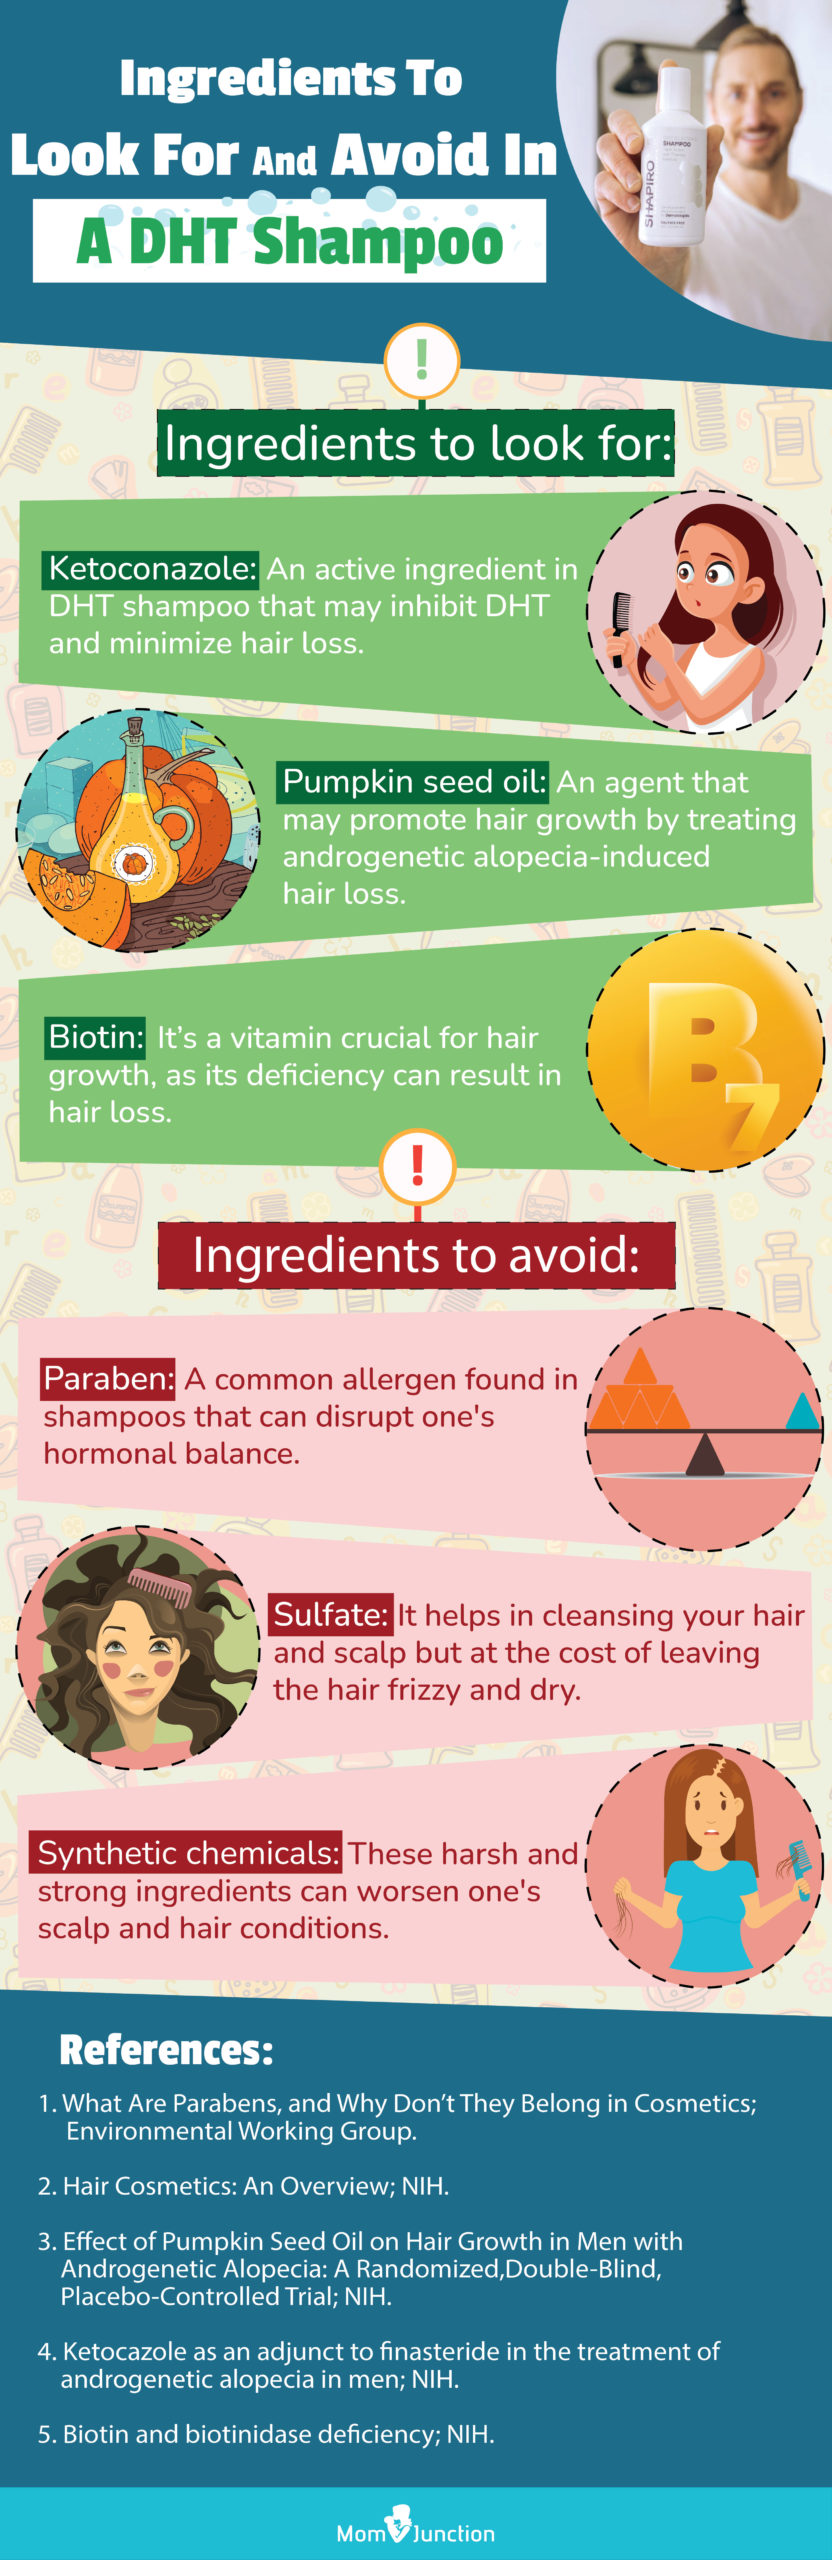 Ingredients To Look For And Avoid In A DHT Shampoo (infographic)